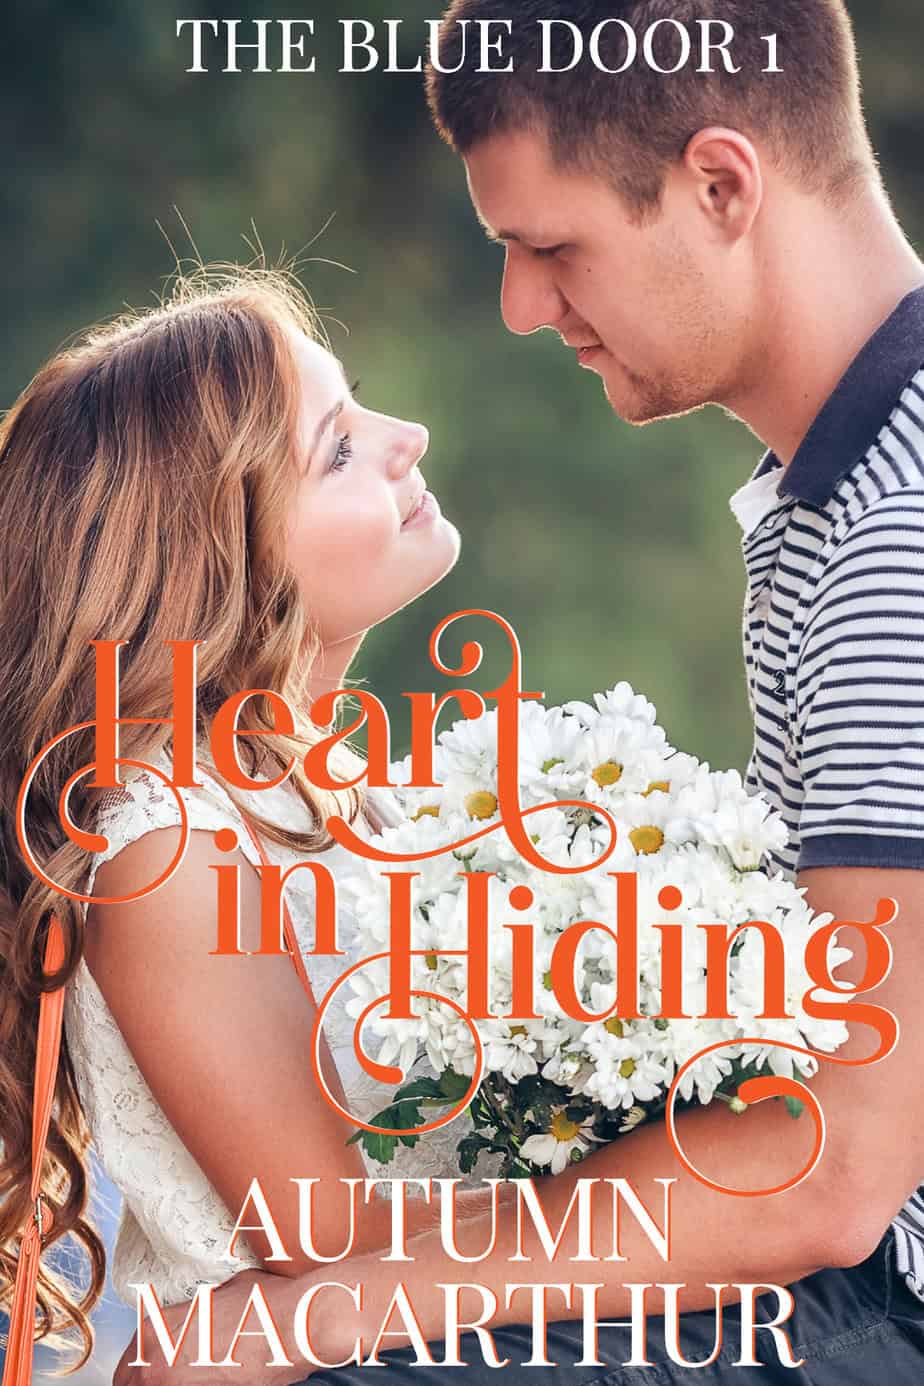 Inspirational romance cover for Heart in Hiding by Autumn Macarthur, smiling woman looks up at a concerned, caring man